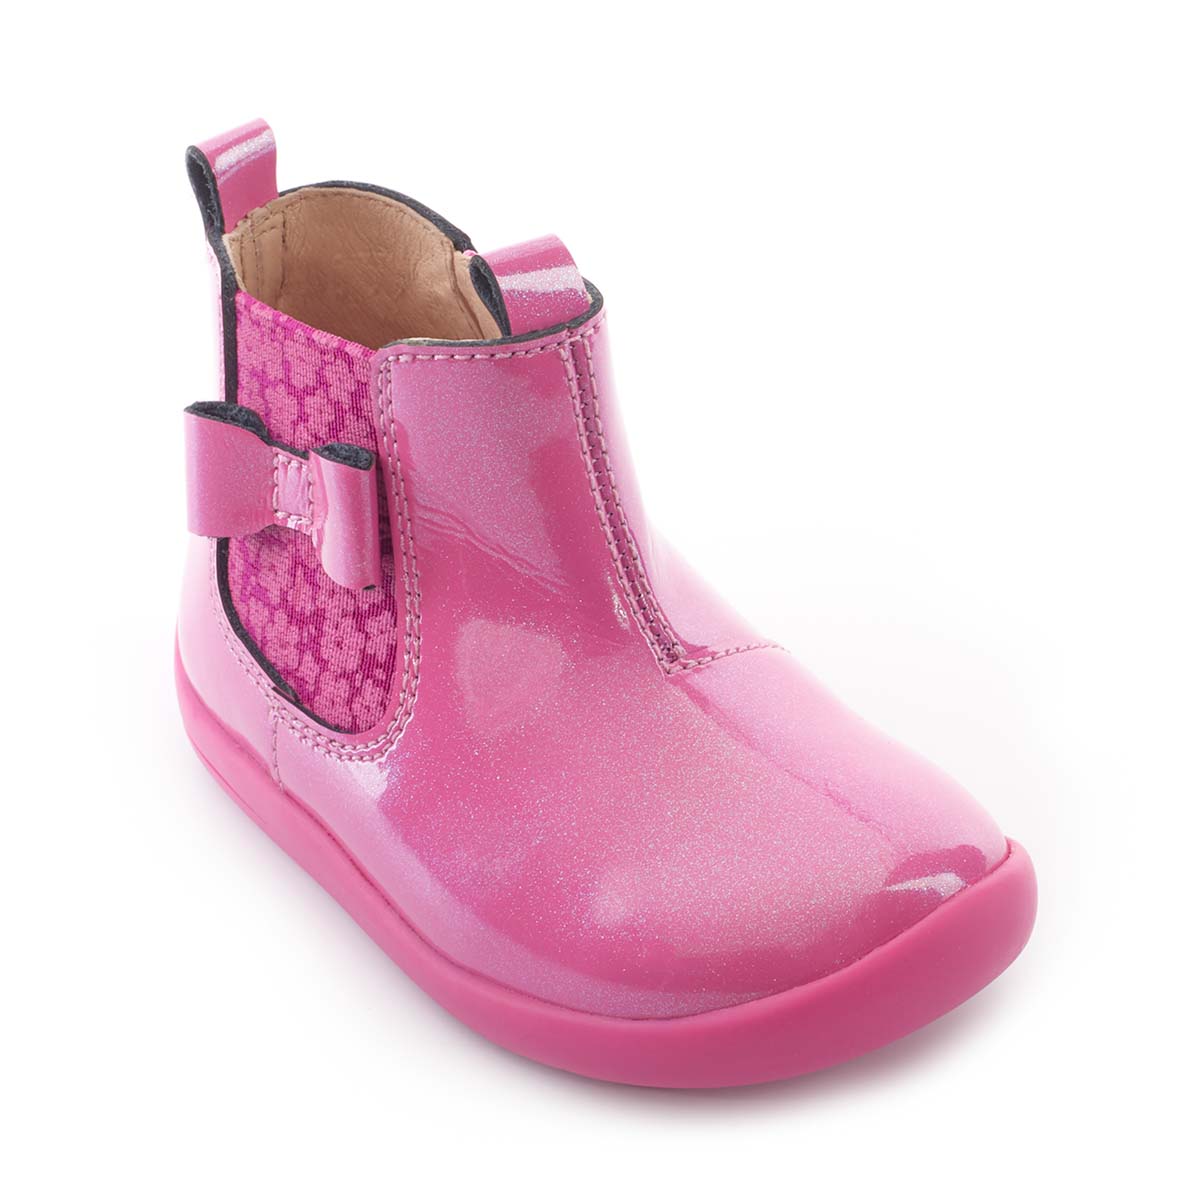 Start Rite - Wonderland Chelsea In Pink 0789-16F In Size 6.5 In Plain Pink Infant Girls Boots  In Pink For kids